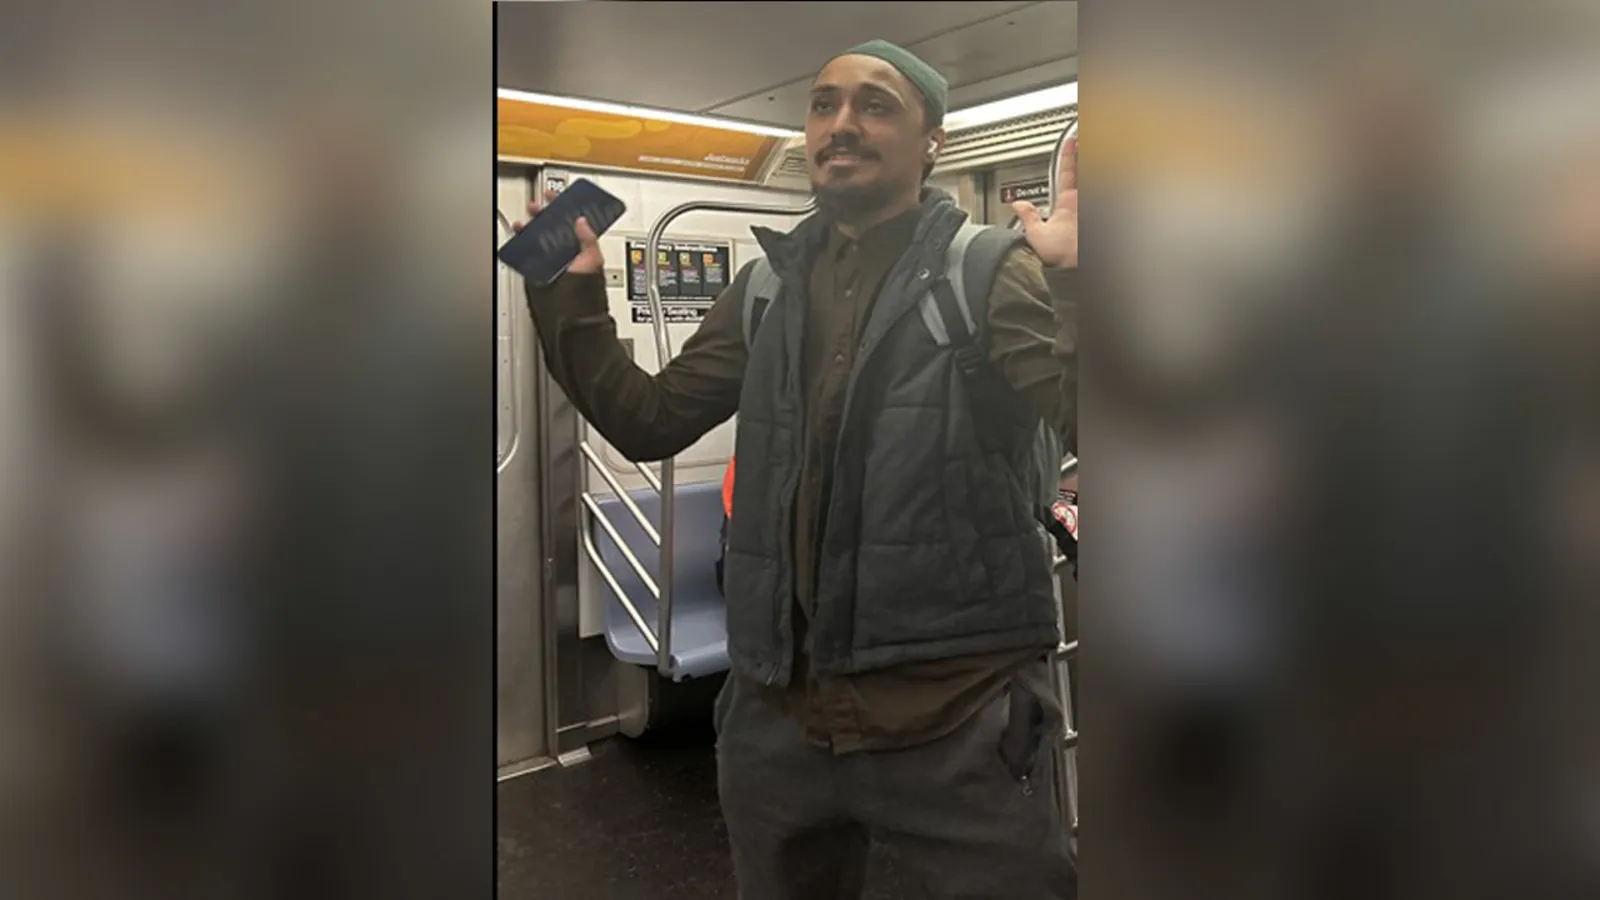 Man attacks woman in possible antisemitic attack inside Manhattan train station - police